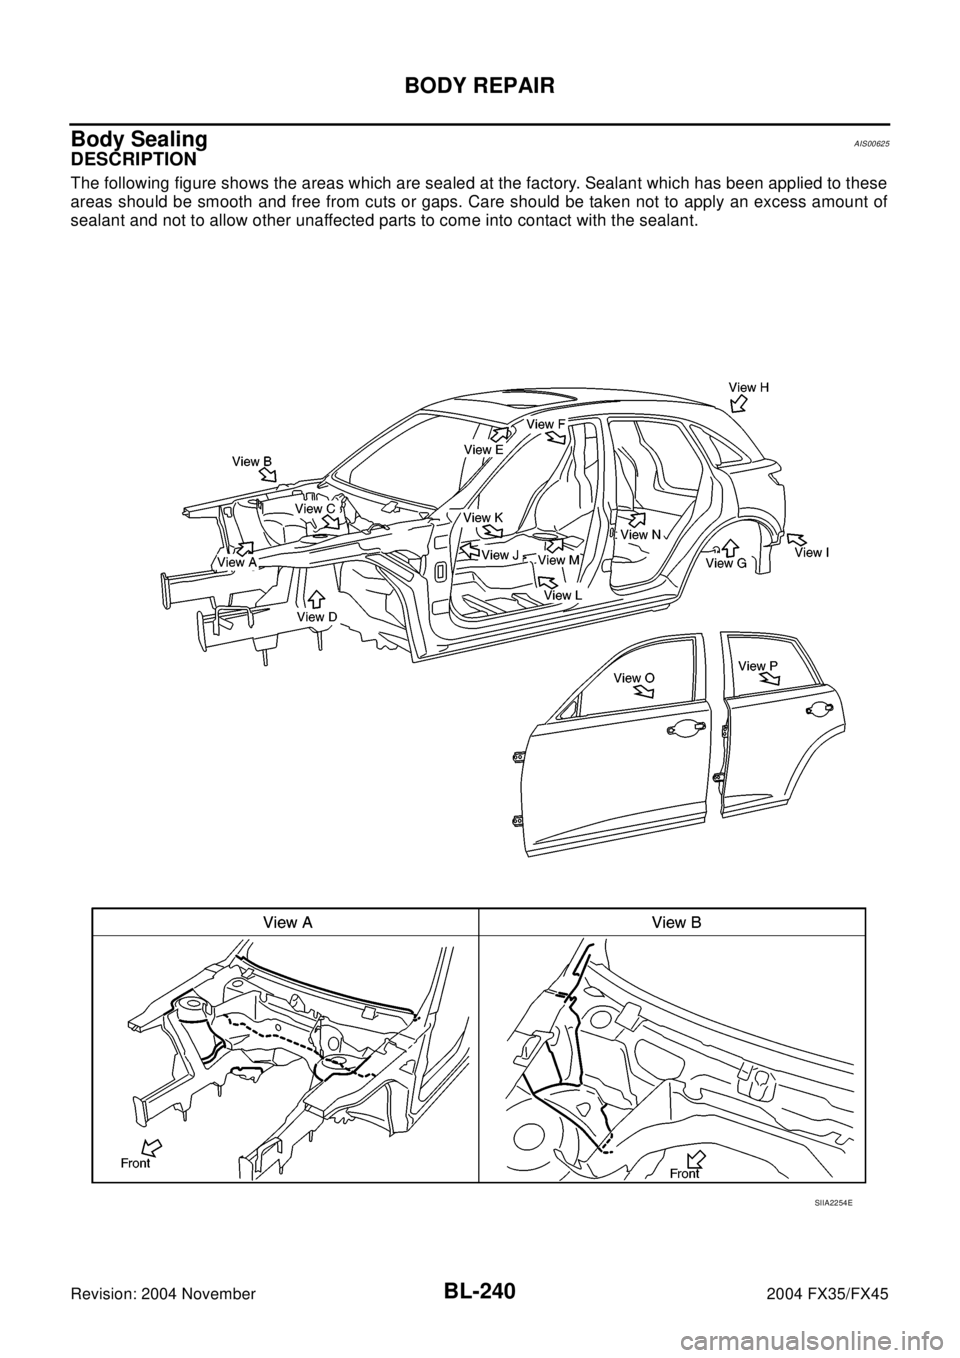 INFINITI FX35 2004  Service Manual BL-240
BODY REPAIR
Revision: 2004 November2004 FX35/FX45
Body SealingAIS00625
DESCRIPTION
The following figure shows the areas which are sealed at the factory. Sealant which has been applied to these
